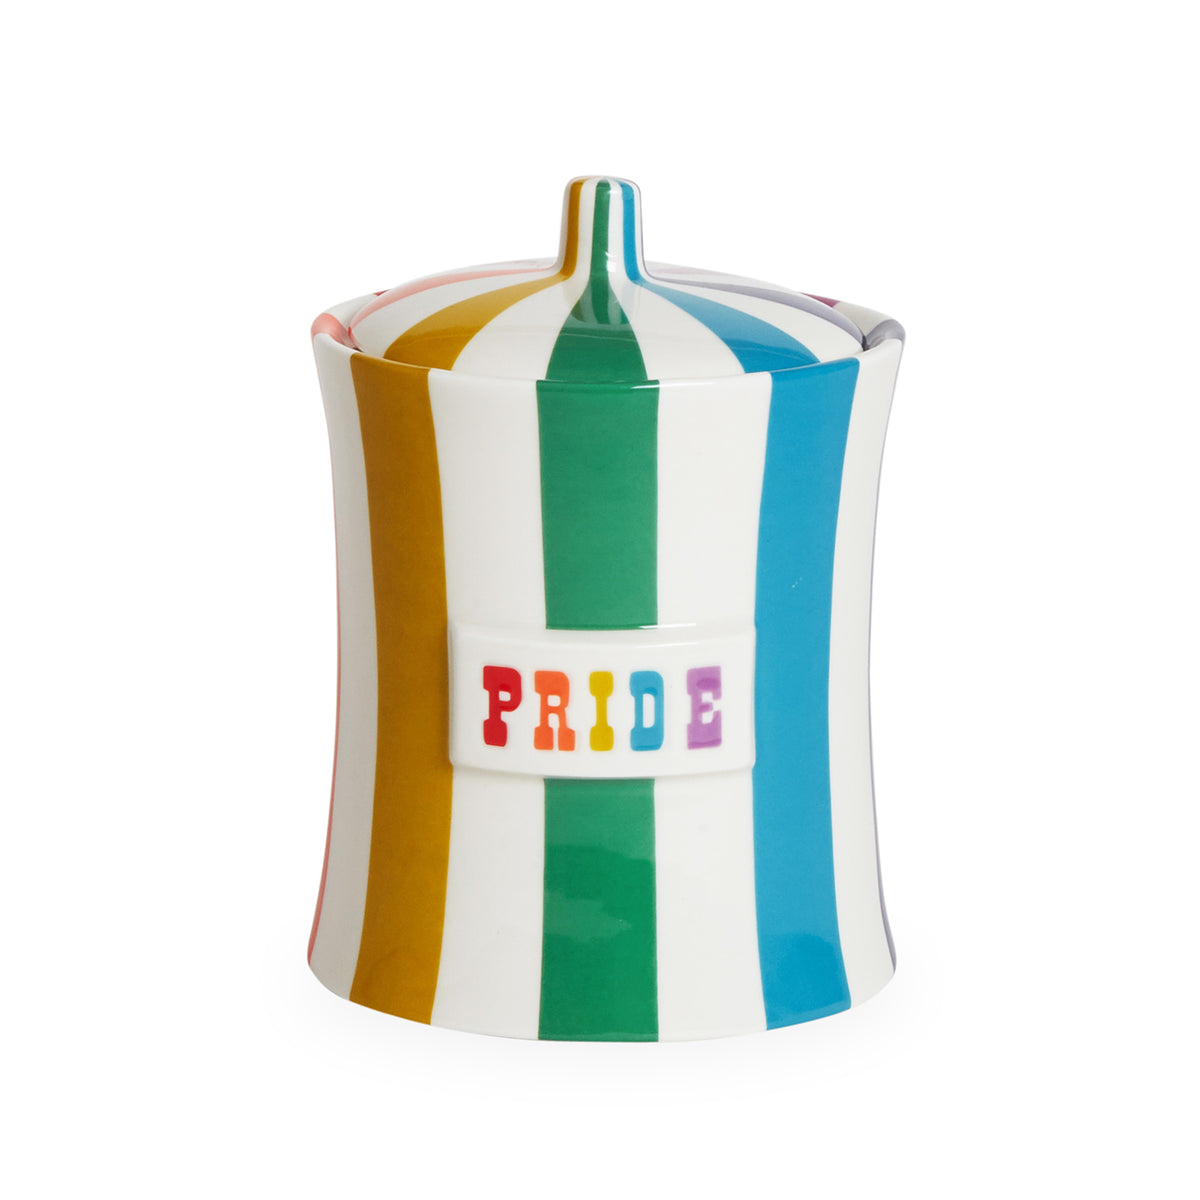 Vice Pride Canister by Jonathan Adler